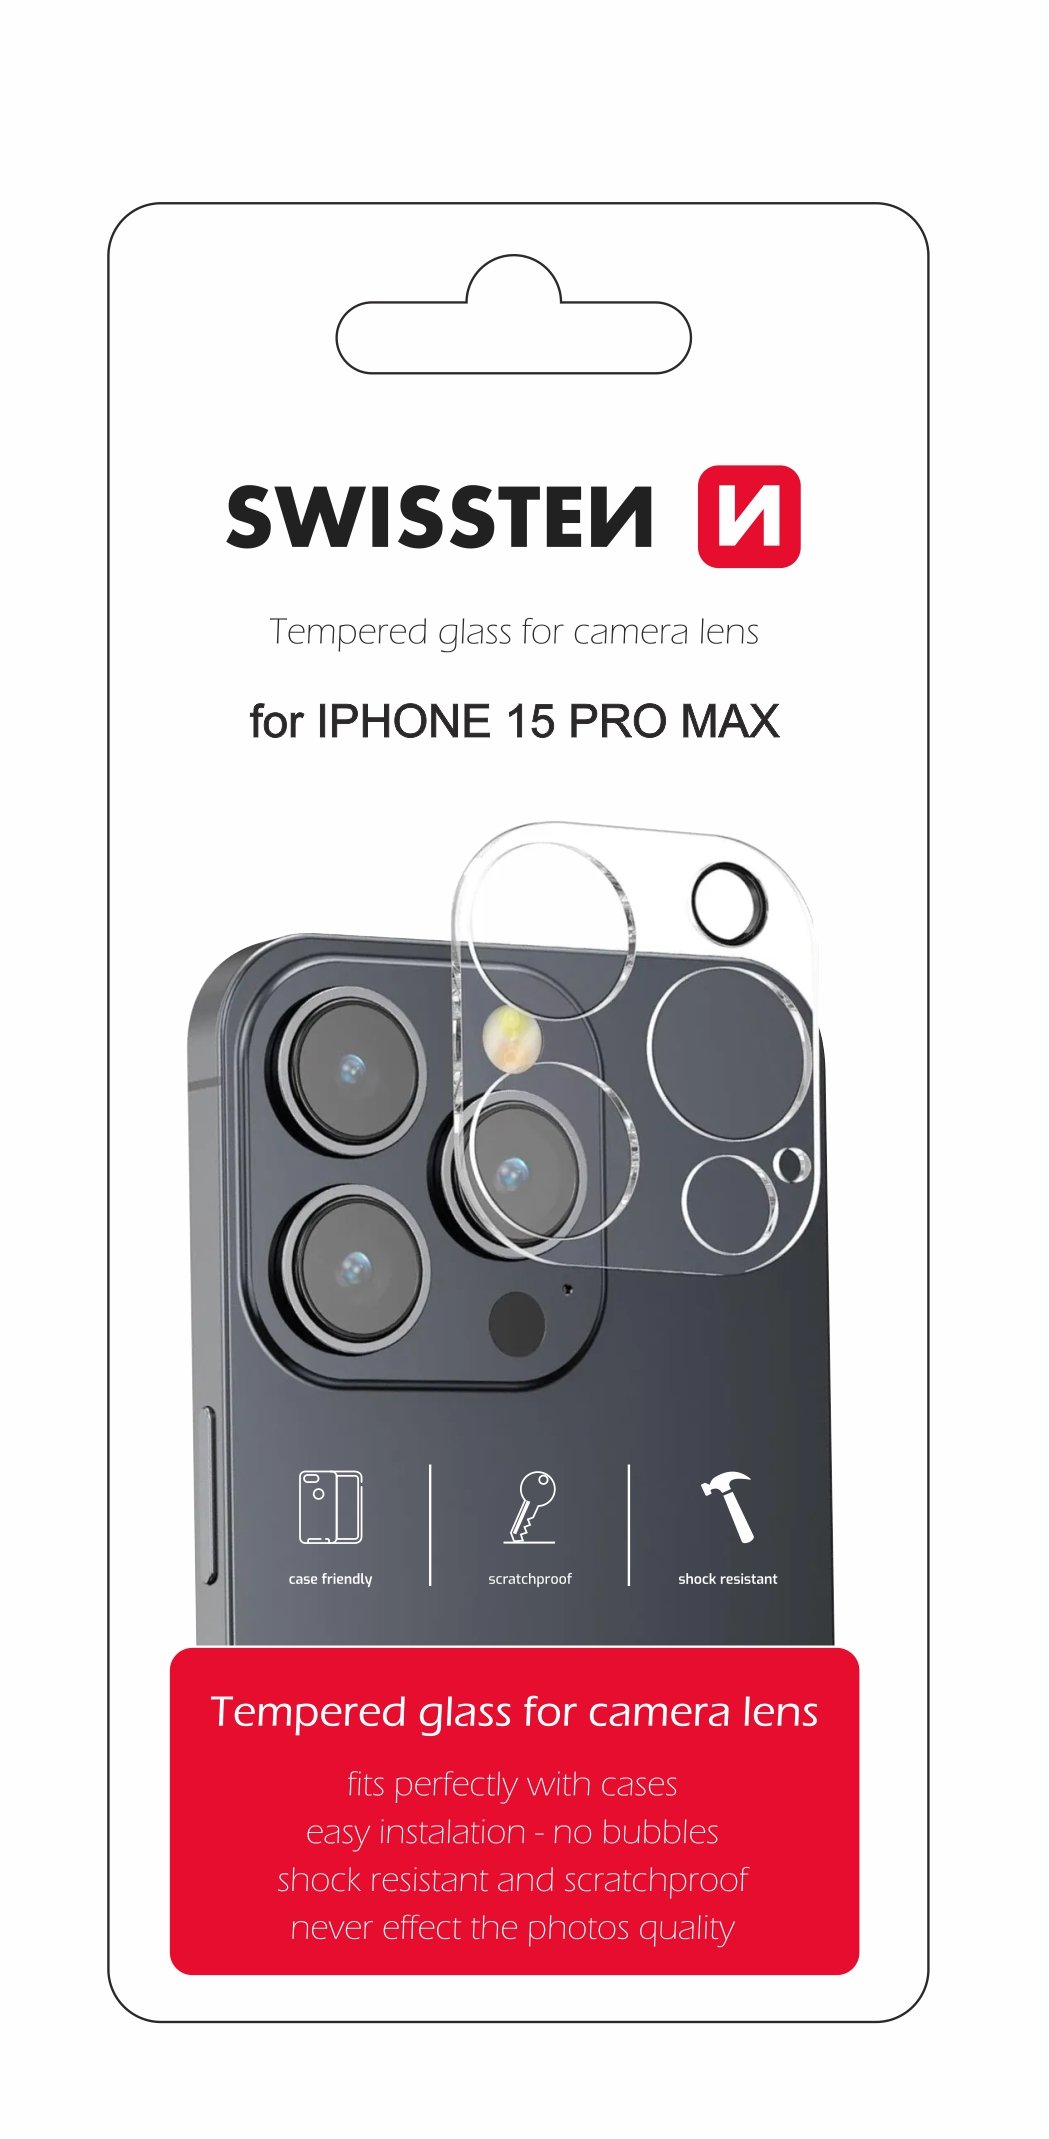 Swissten Tempered Glass For Camera Lens For Apple iPhone 15 Pro Max